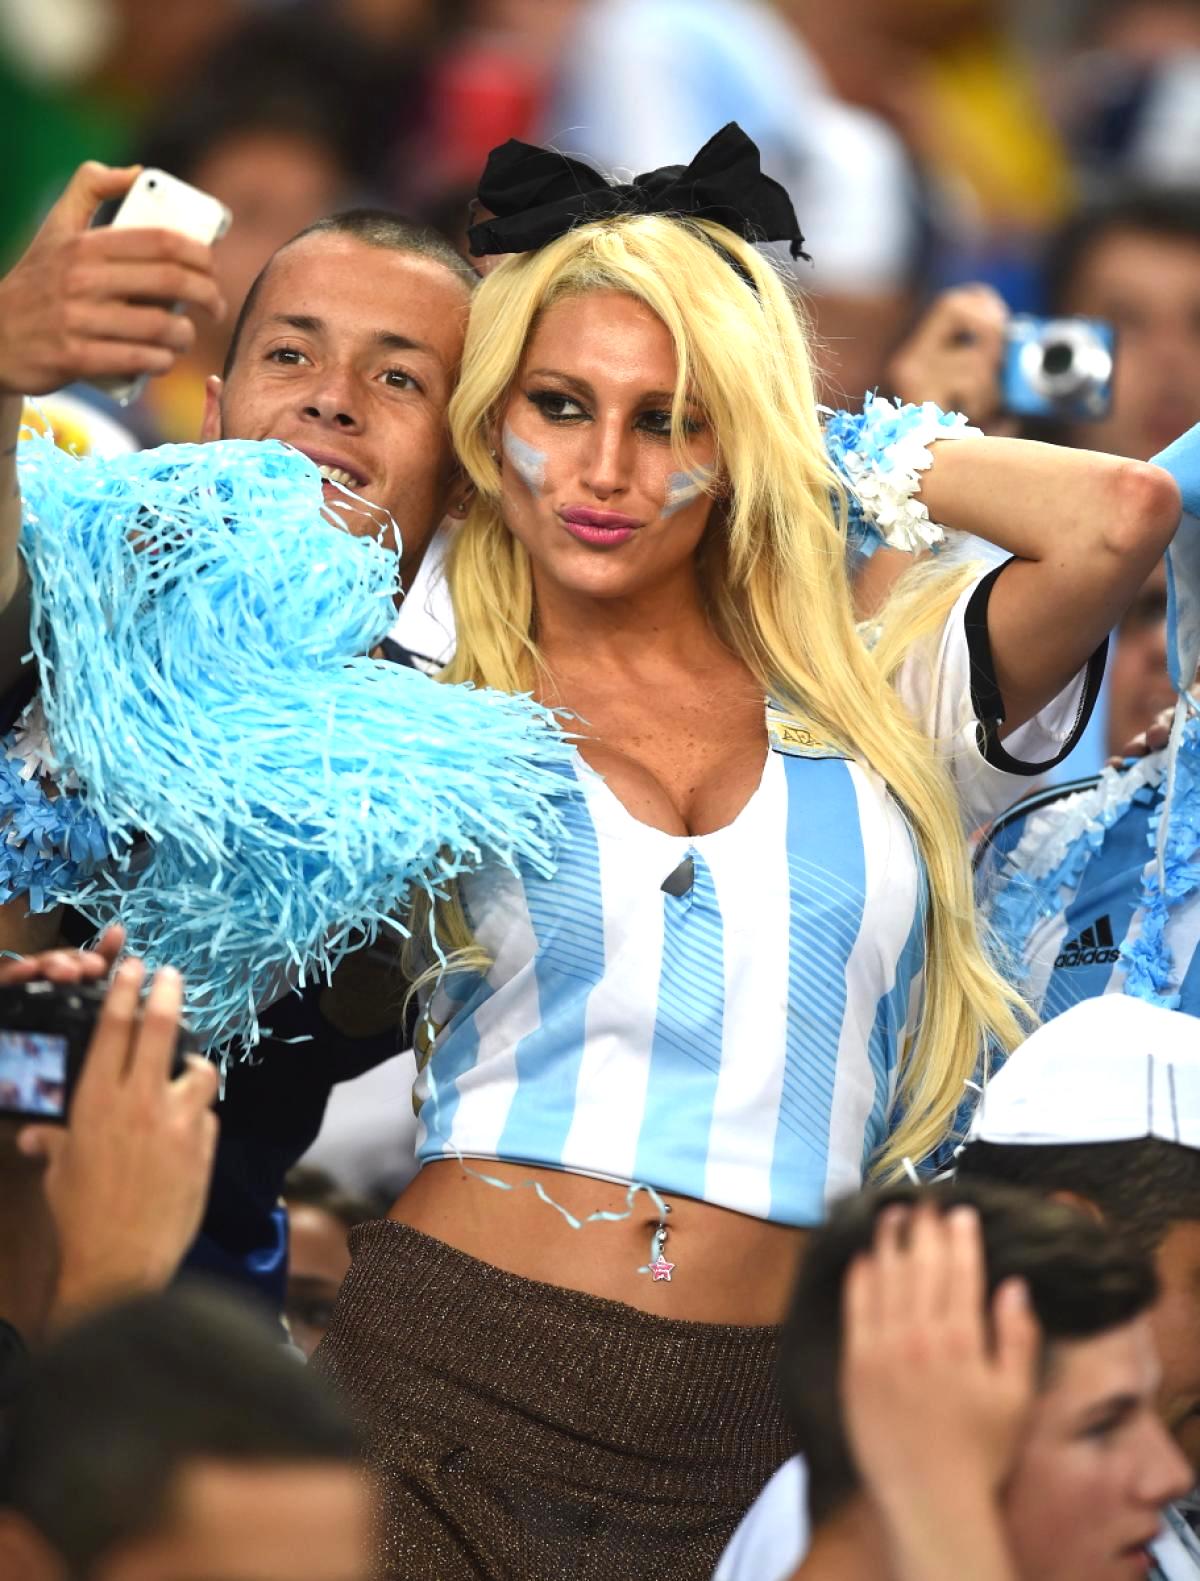 30 Hottest Female Fans Spotted At The 2014 Fifa World Cup Total Pro Sports